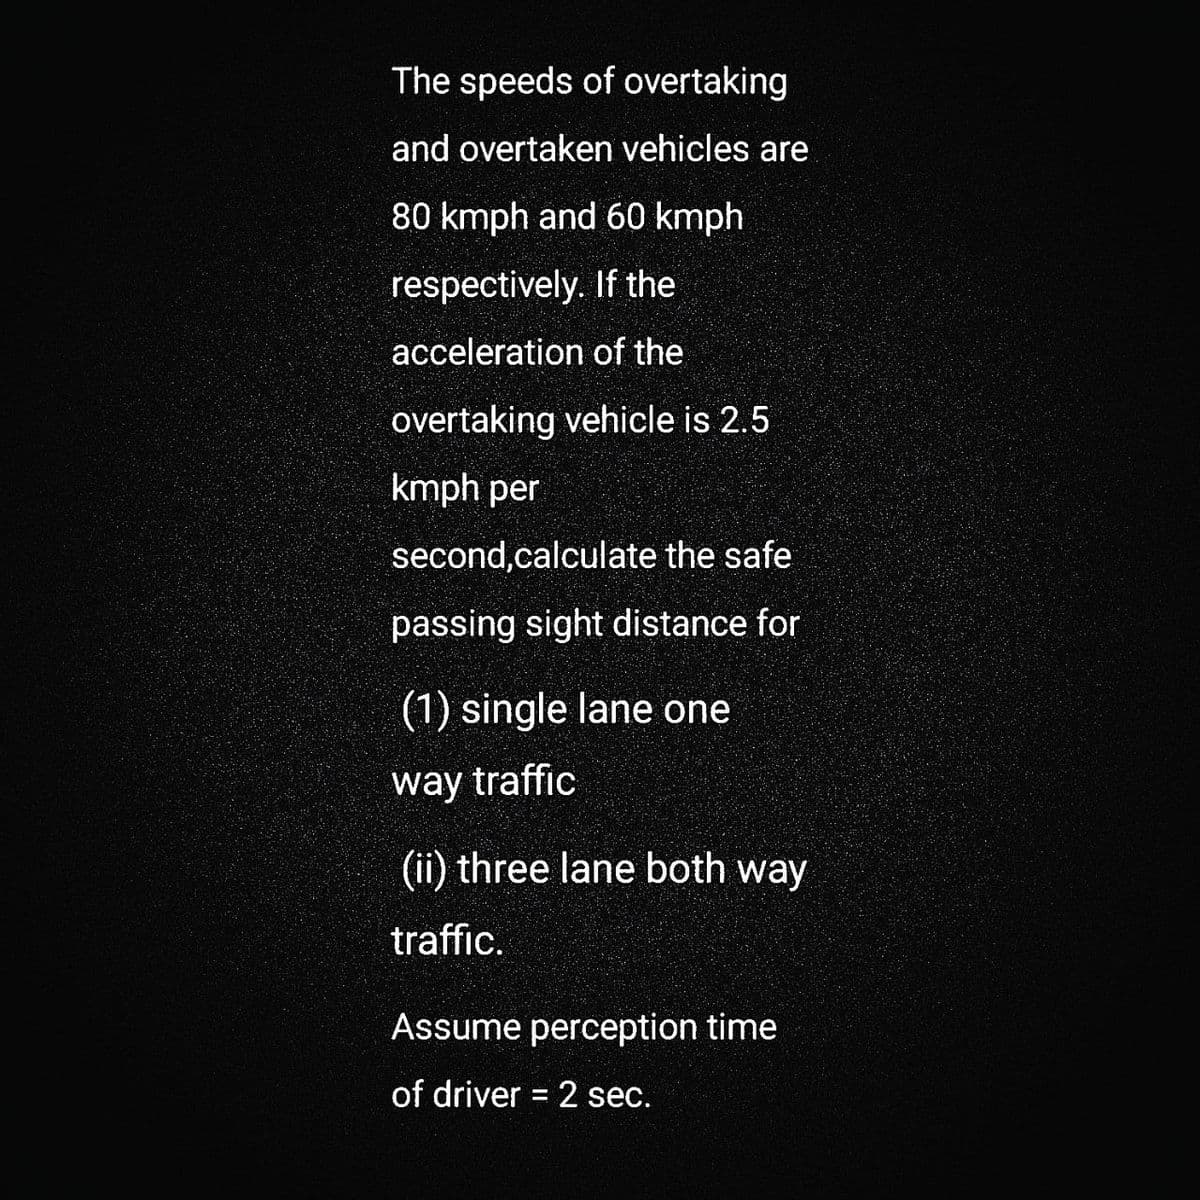 The speeds of overtaking
and overtaken vehicles are
80 kmph and 60 kmph
respectively. If the
acceleration of the
overtaking vehicle is 2.5
kmph per
second,calculate the safe
passing sight distance for
(1) single lane one
way traffic
(ii) three lane both way
traffic.
Assume perception time
of driver = 2 sec.